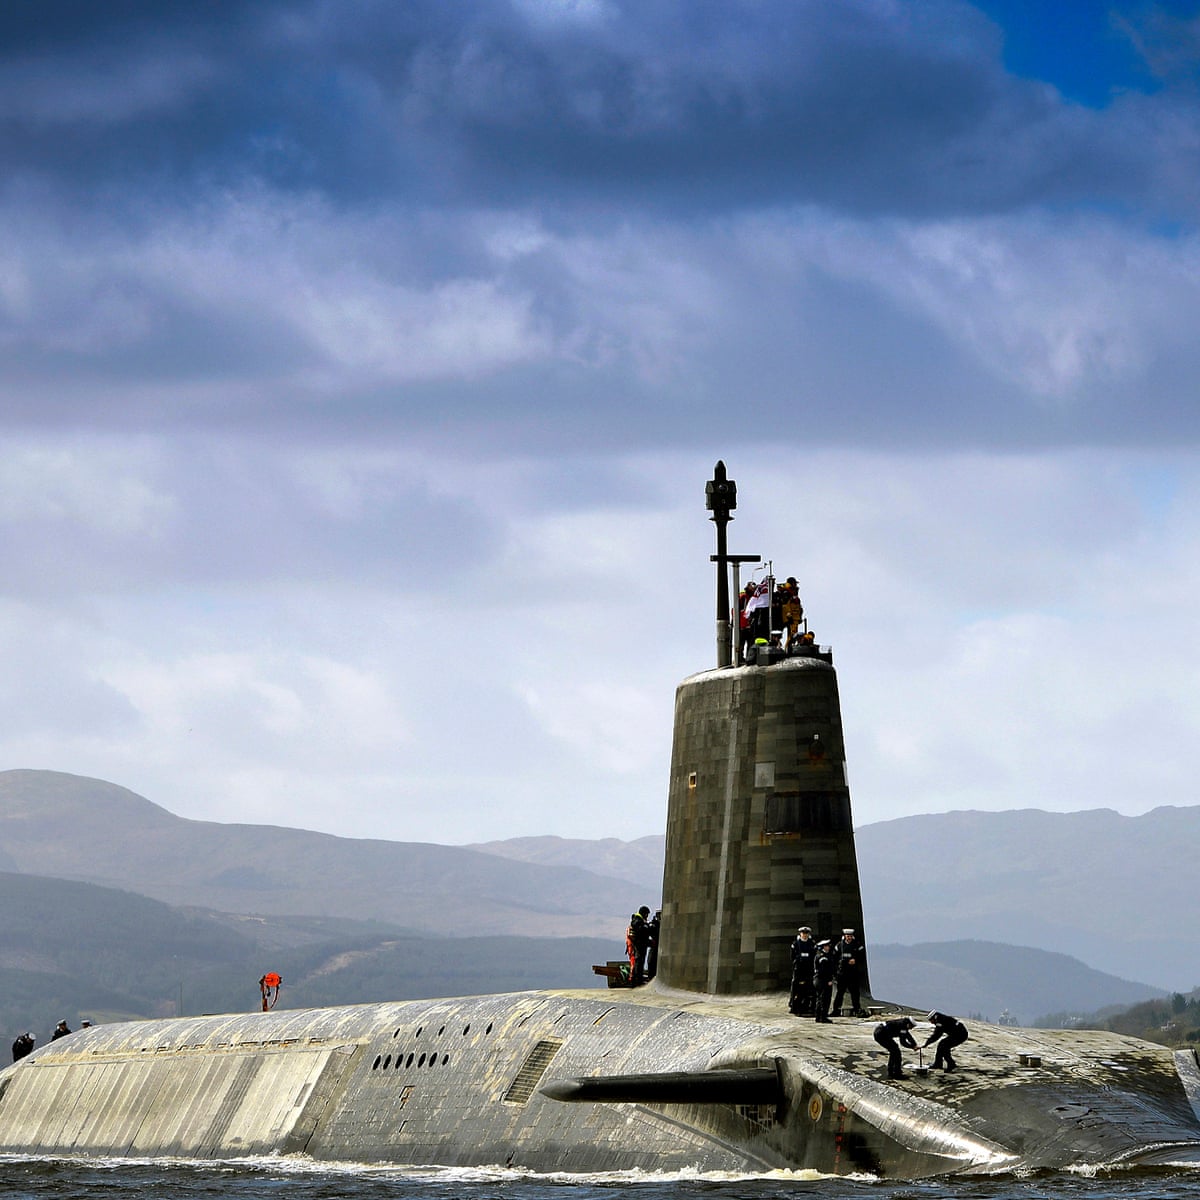 Two Key Defence Questions Facing Britain Trident And The Middle East Trident The Guardian